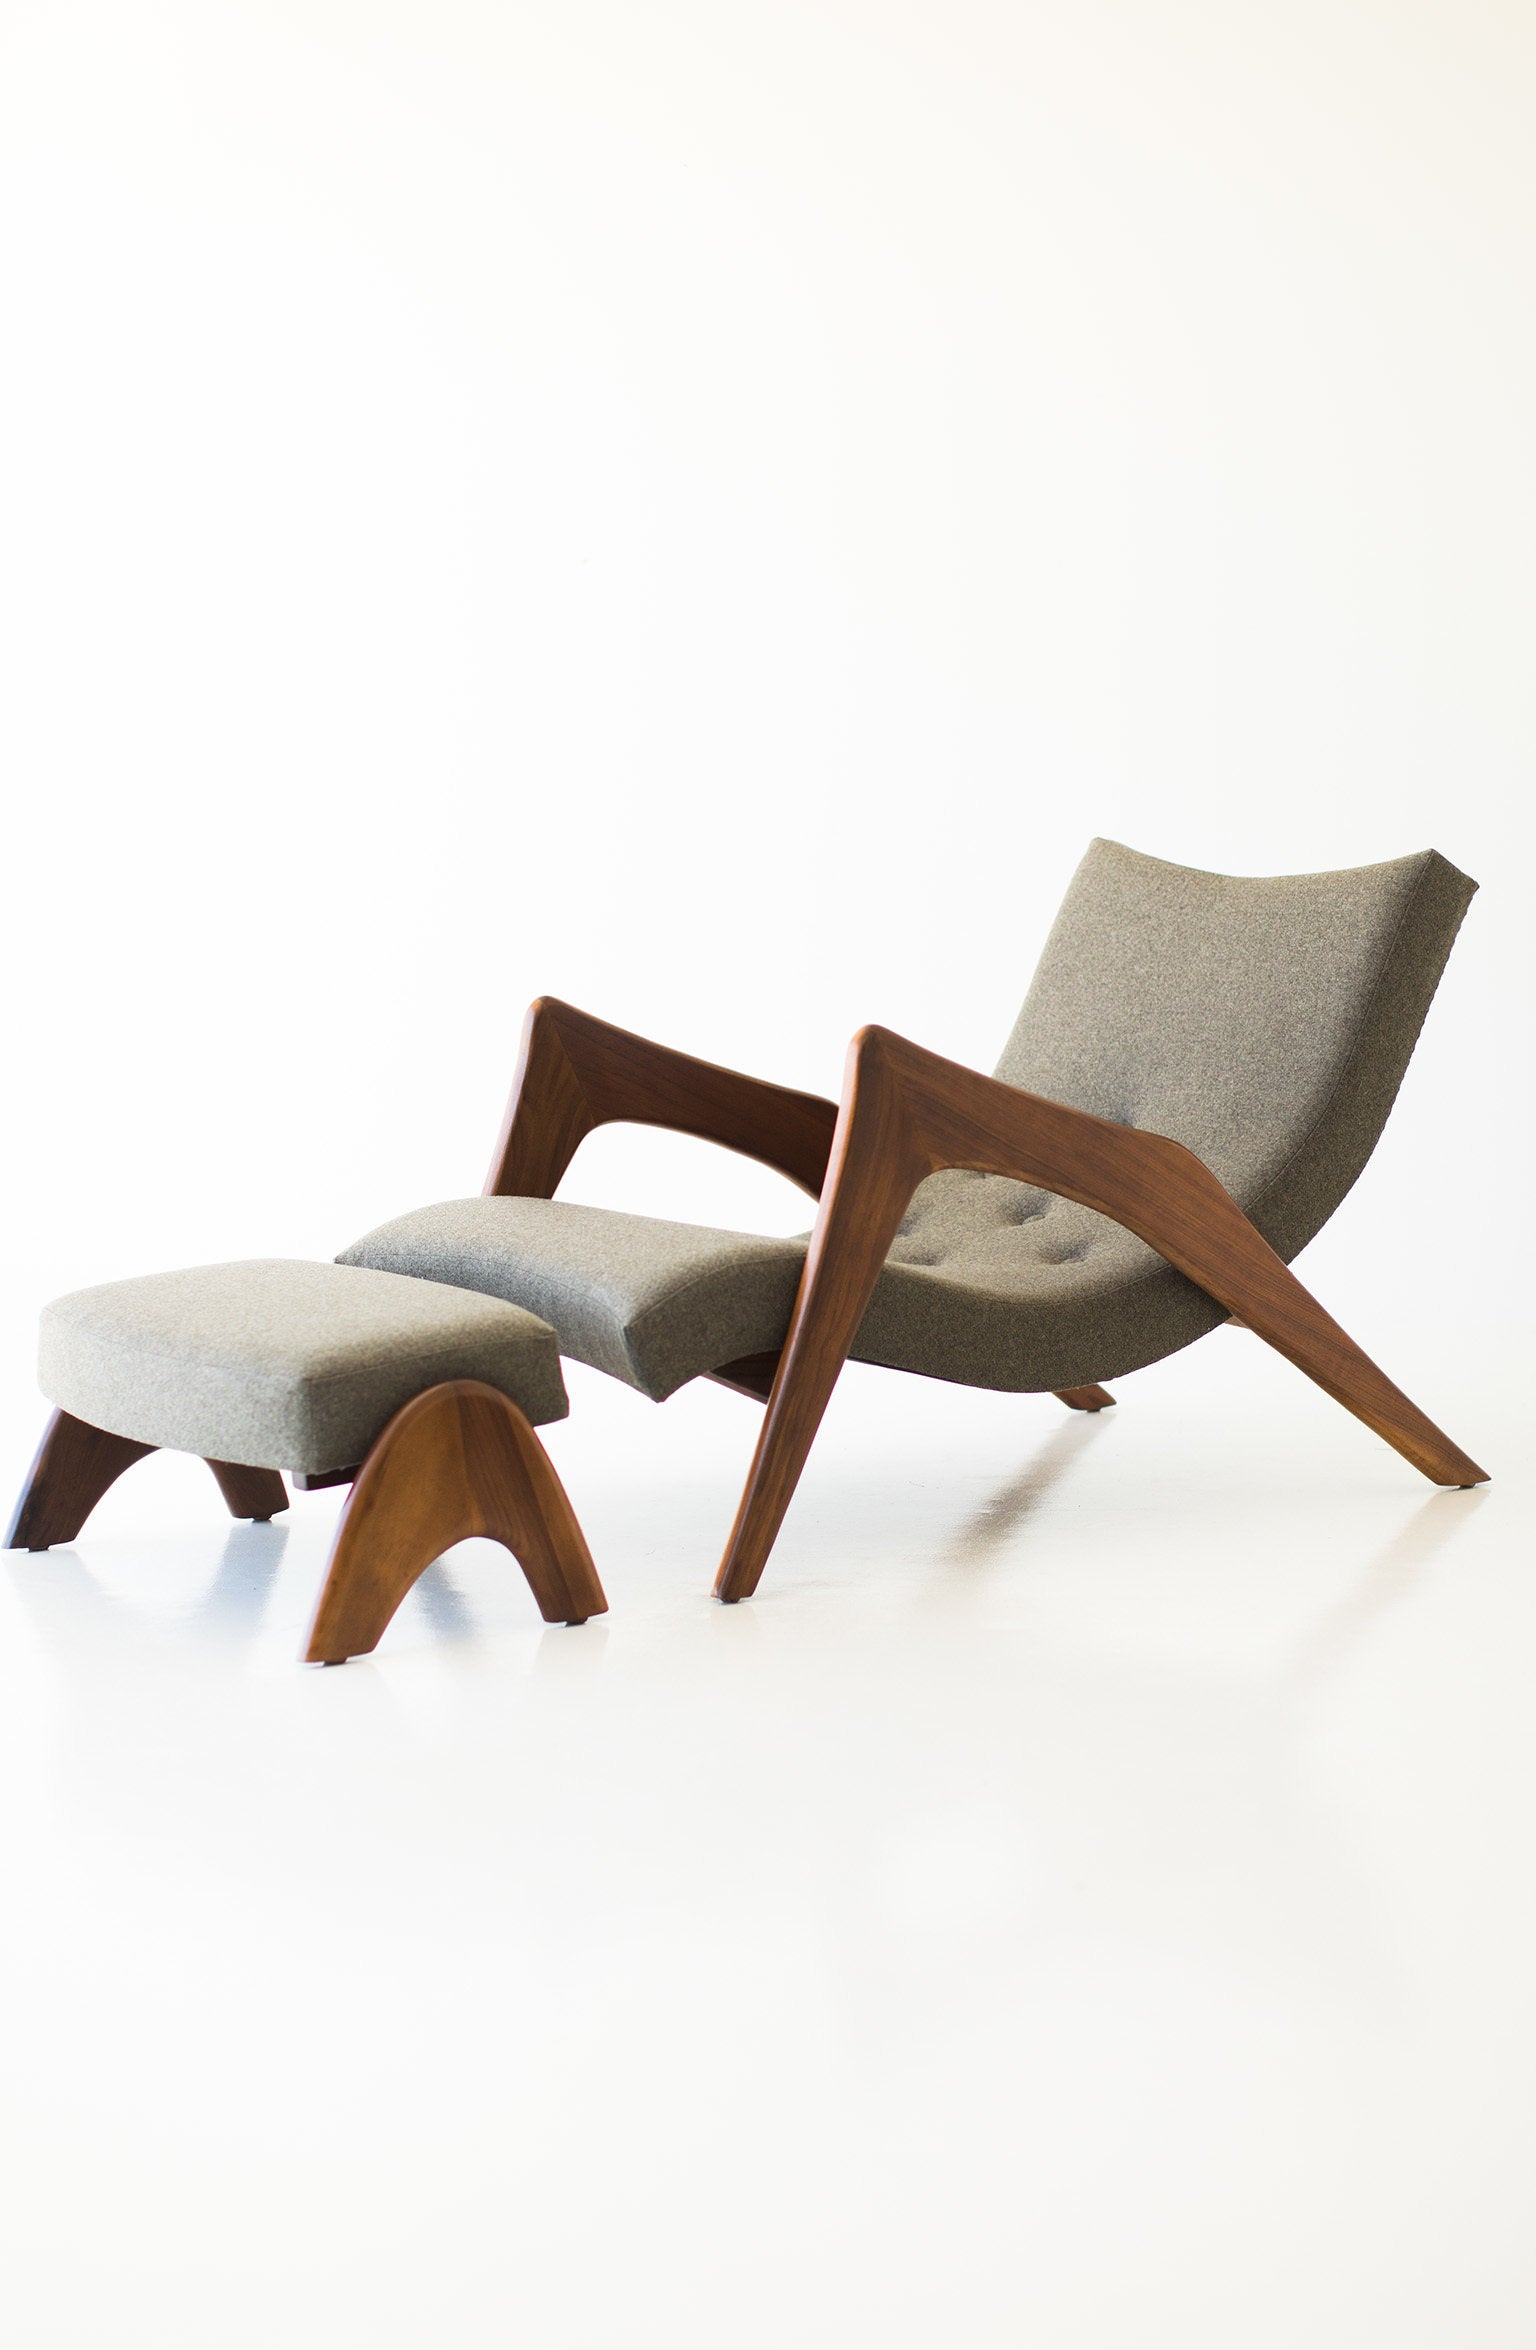 Adrian Pearsall Lounge Chair and Ottoman for Craft Associates Inc. - 05101802